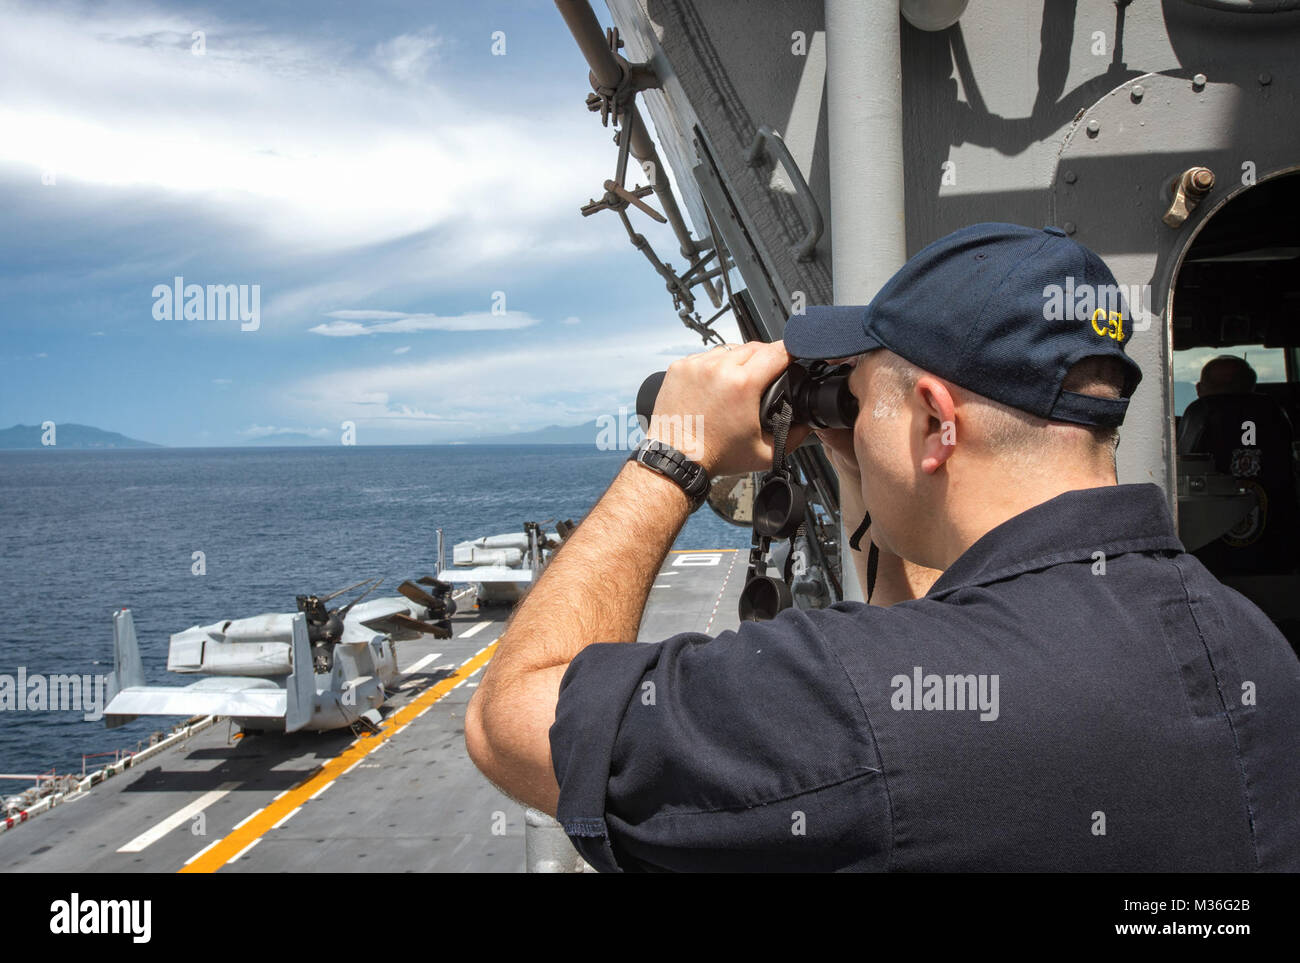 160927-N-WF272-036 WATERS NEAR THE PHILIPPINES (Sept. 27, 2016) Lt. Cmdr. Joseph Teixeira views Philippines from the bridge of amphibious assault ship USS Bonhomme Richard (LHD 6). Bonhomme Richard, flagship of the Bonhomme Richard Expeditionary Strike Group, is operating in waters near Philippines in support of security and stability in the Indo-Asia Pacific region. (U.S. Navy photo by Mass Communication Specialist 2nd Class Diana Quinlan/Released) Amphibious ship USS Bonhomme Richard transits near the Philippines by #PACOM Stock Photo